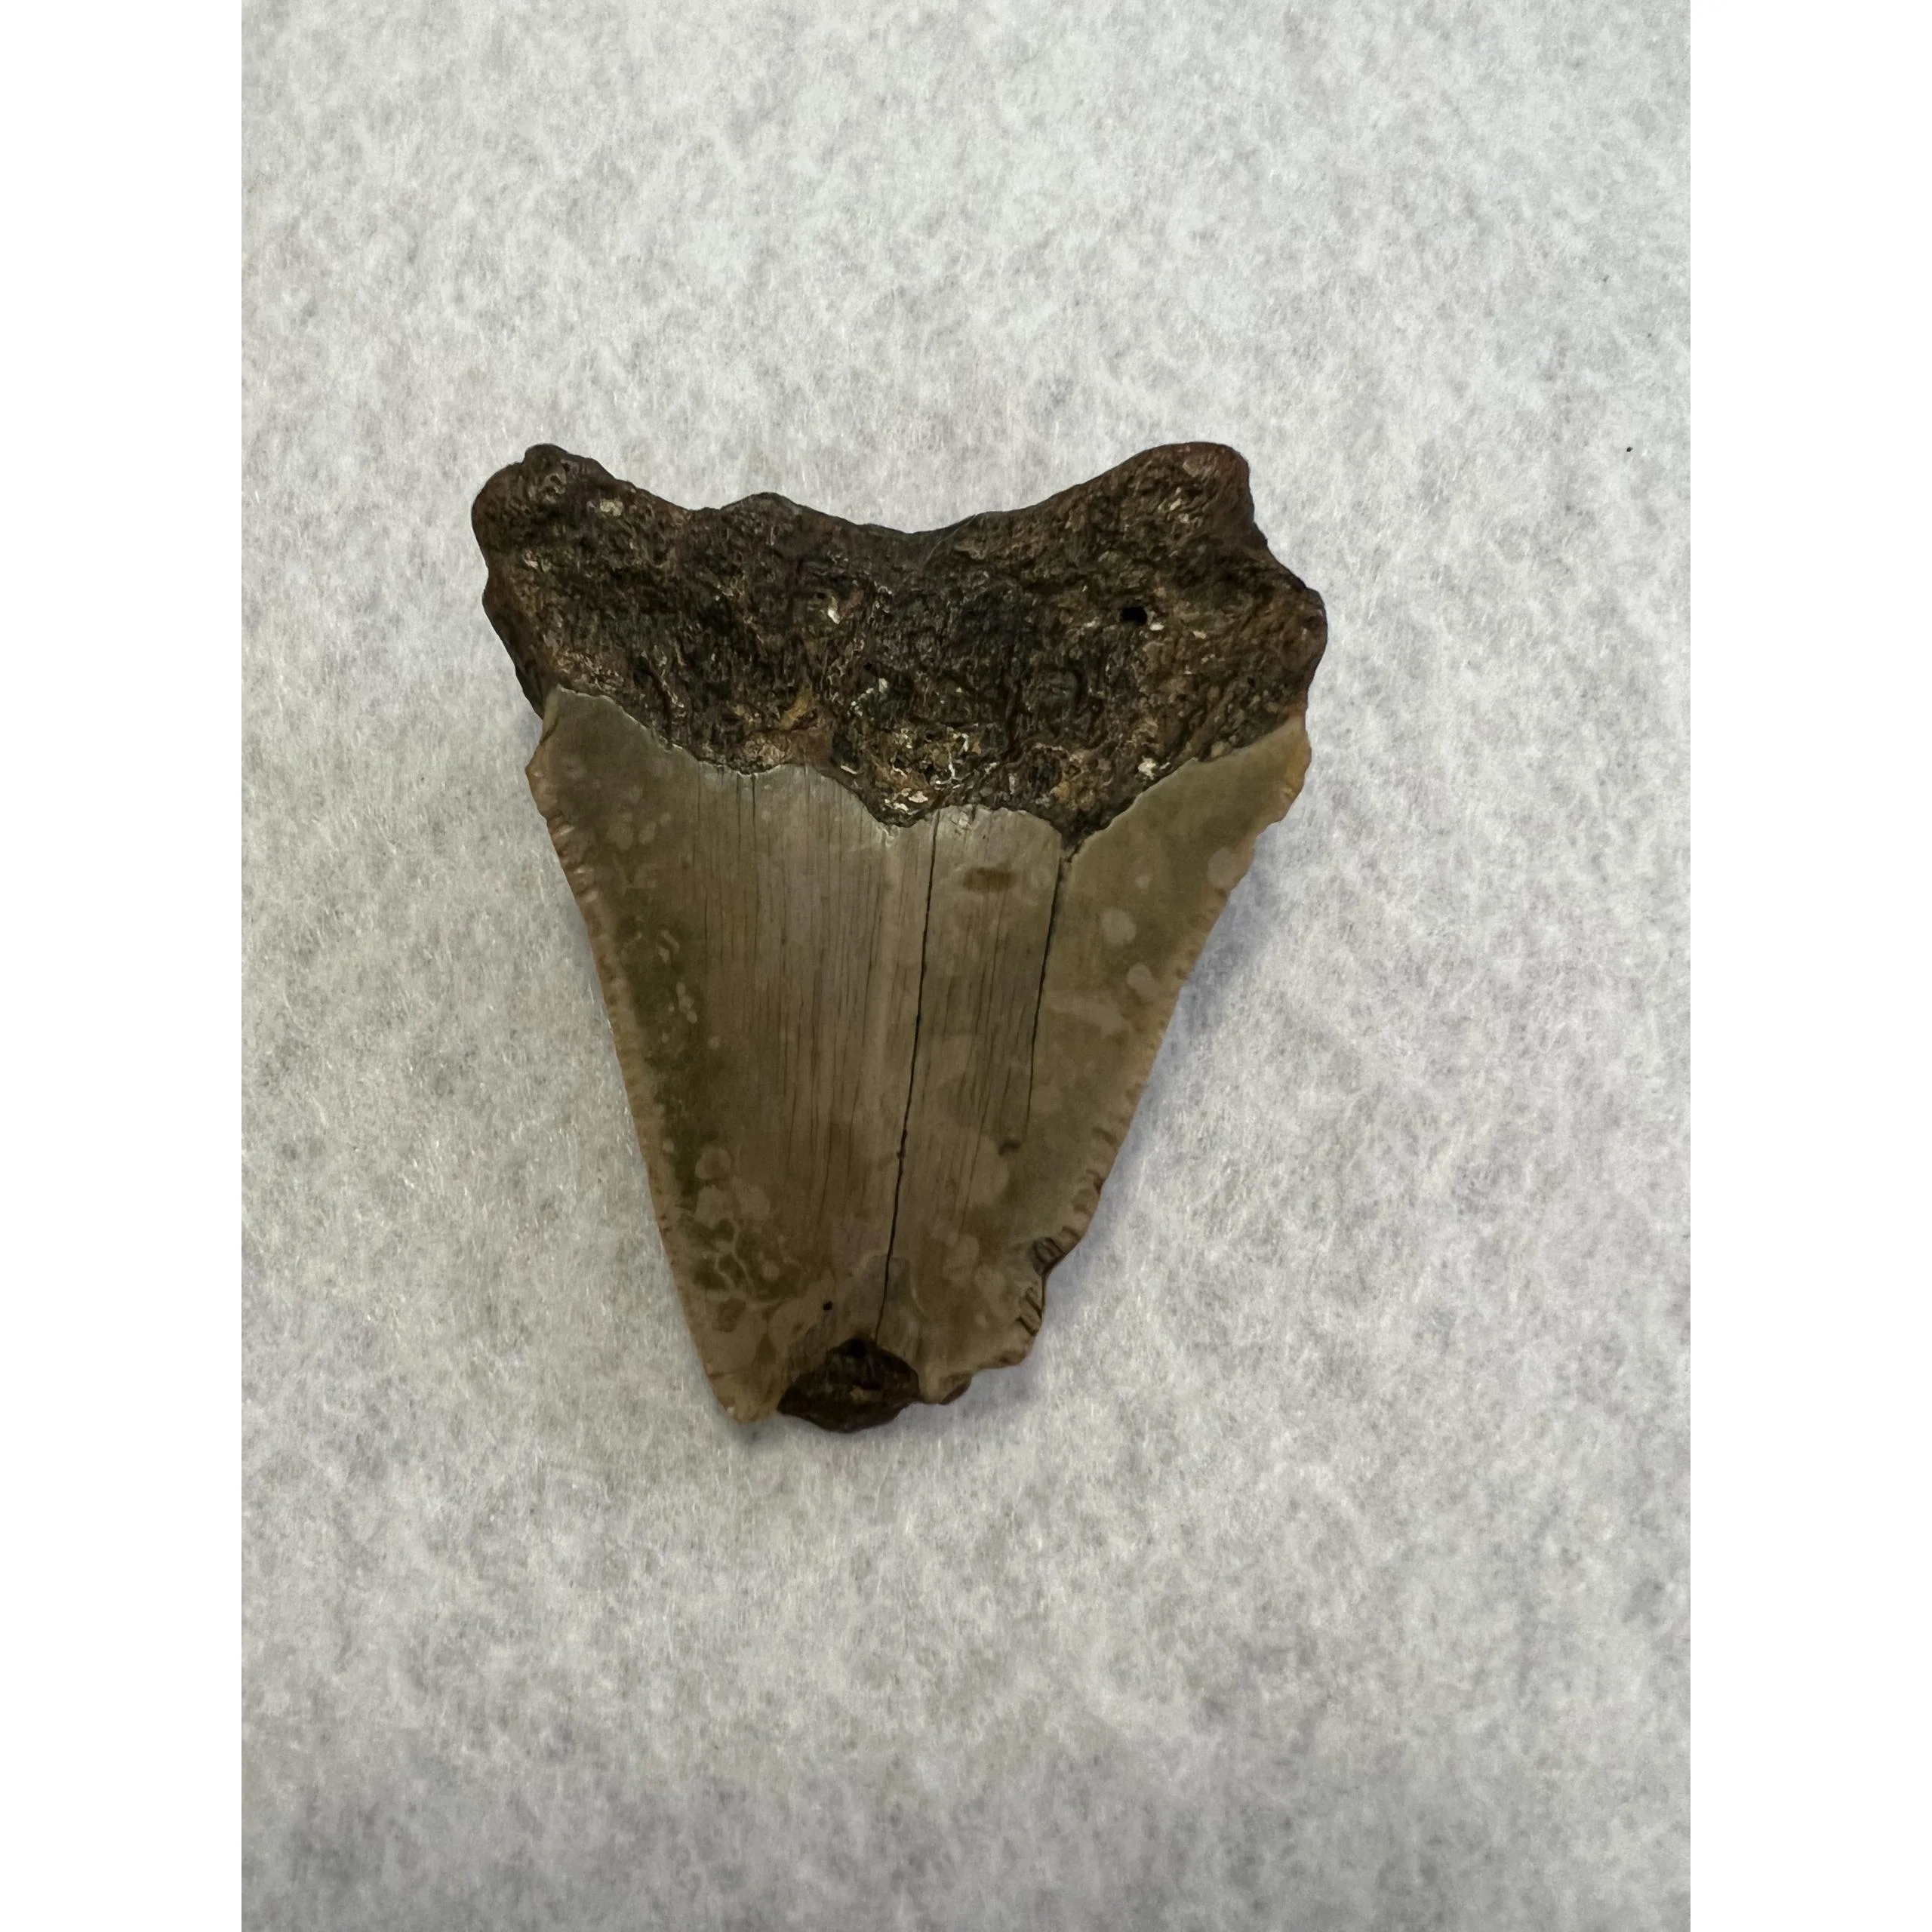 Megalodon Partial Tooth, South Carolina, 2.78 inch Prehistoric Online